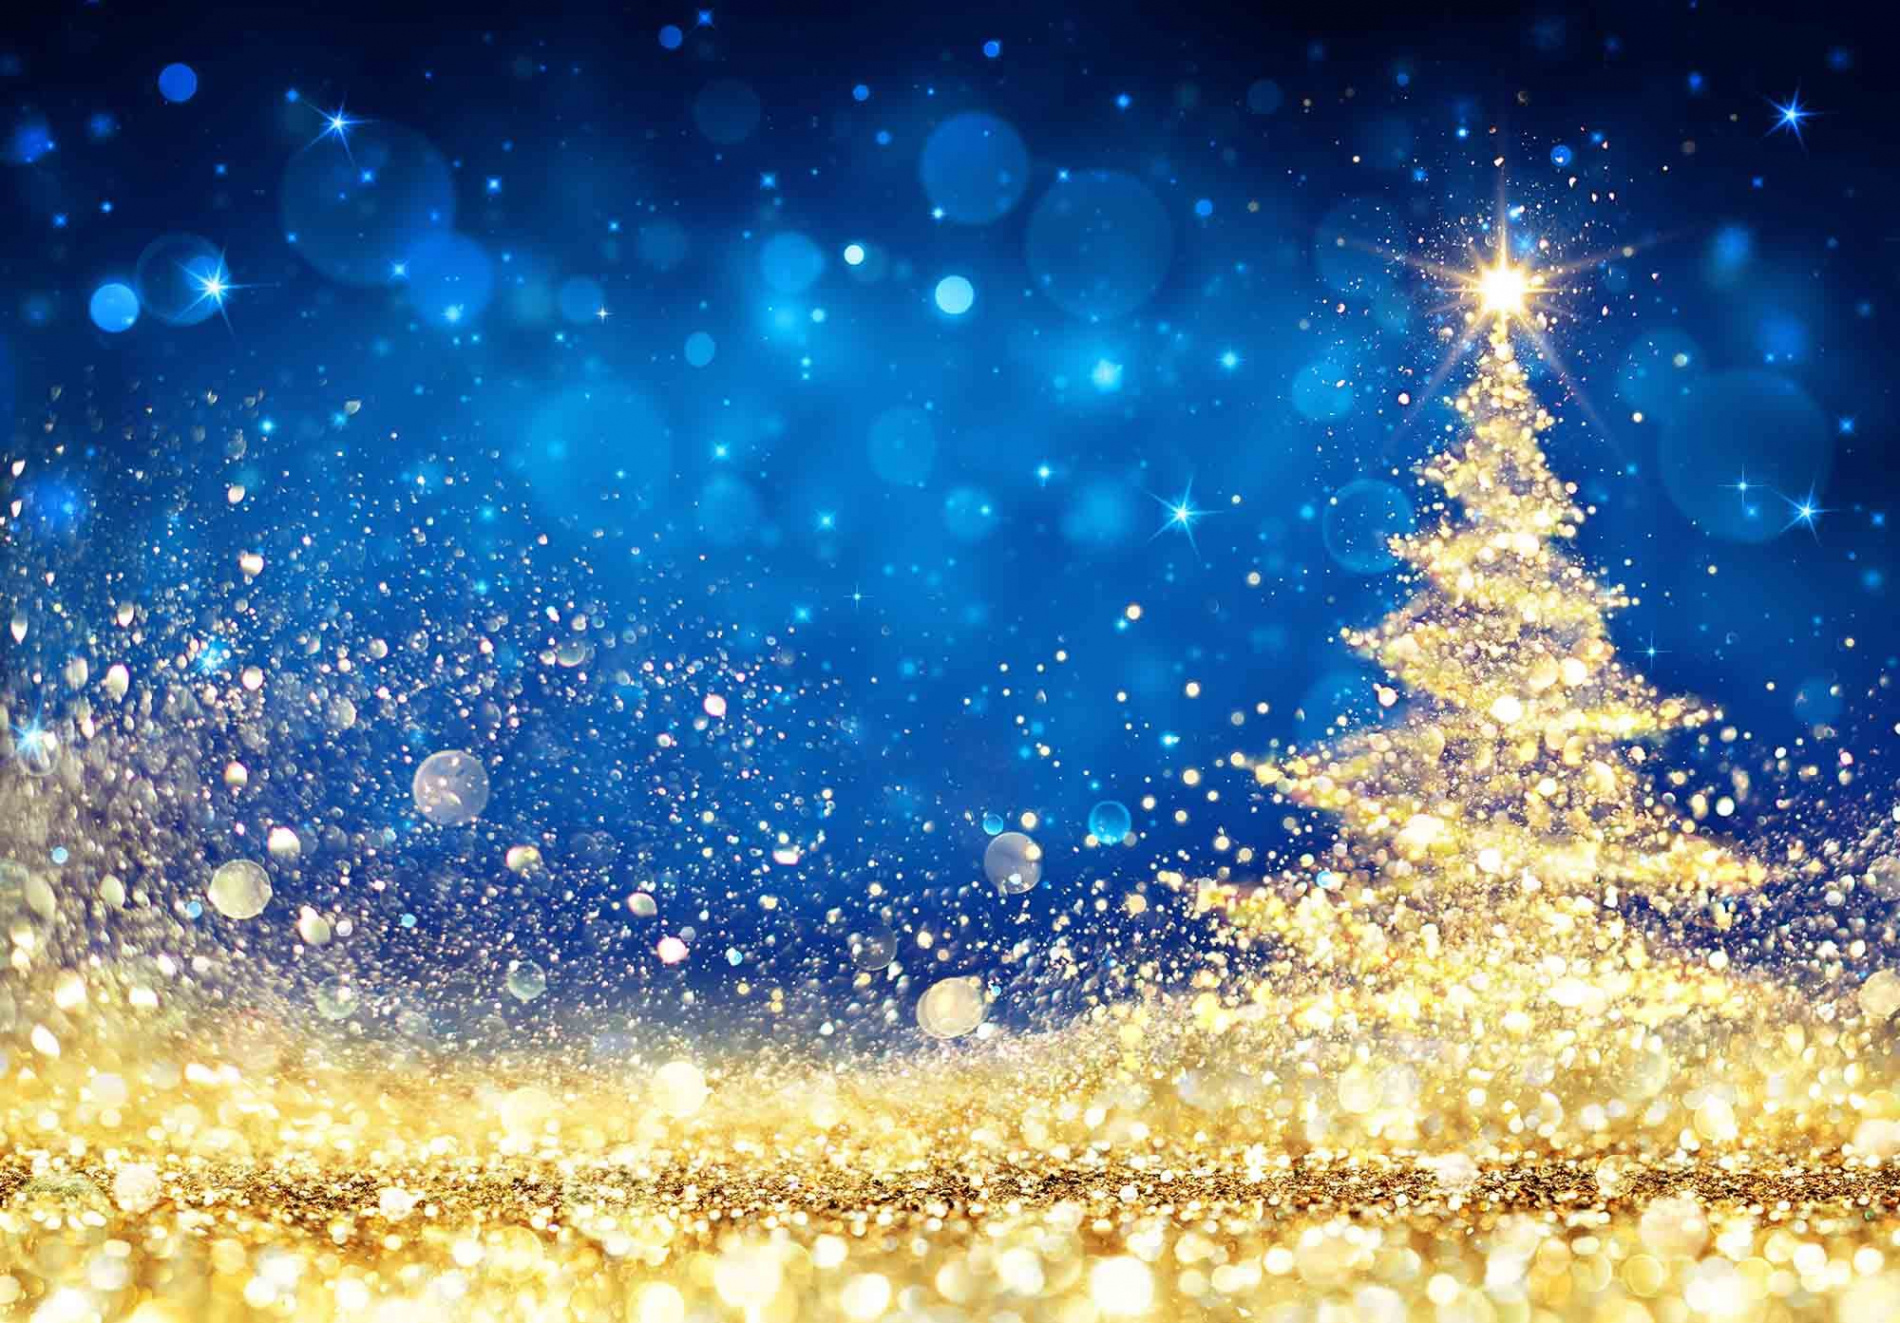 Shiny Christmas Tree - Golden Dust Glittering In The Blue Background  Backdrop - .